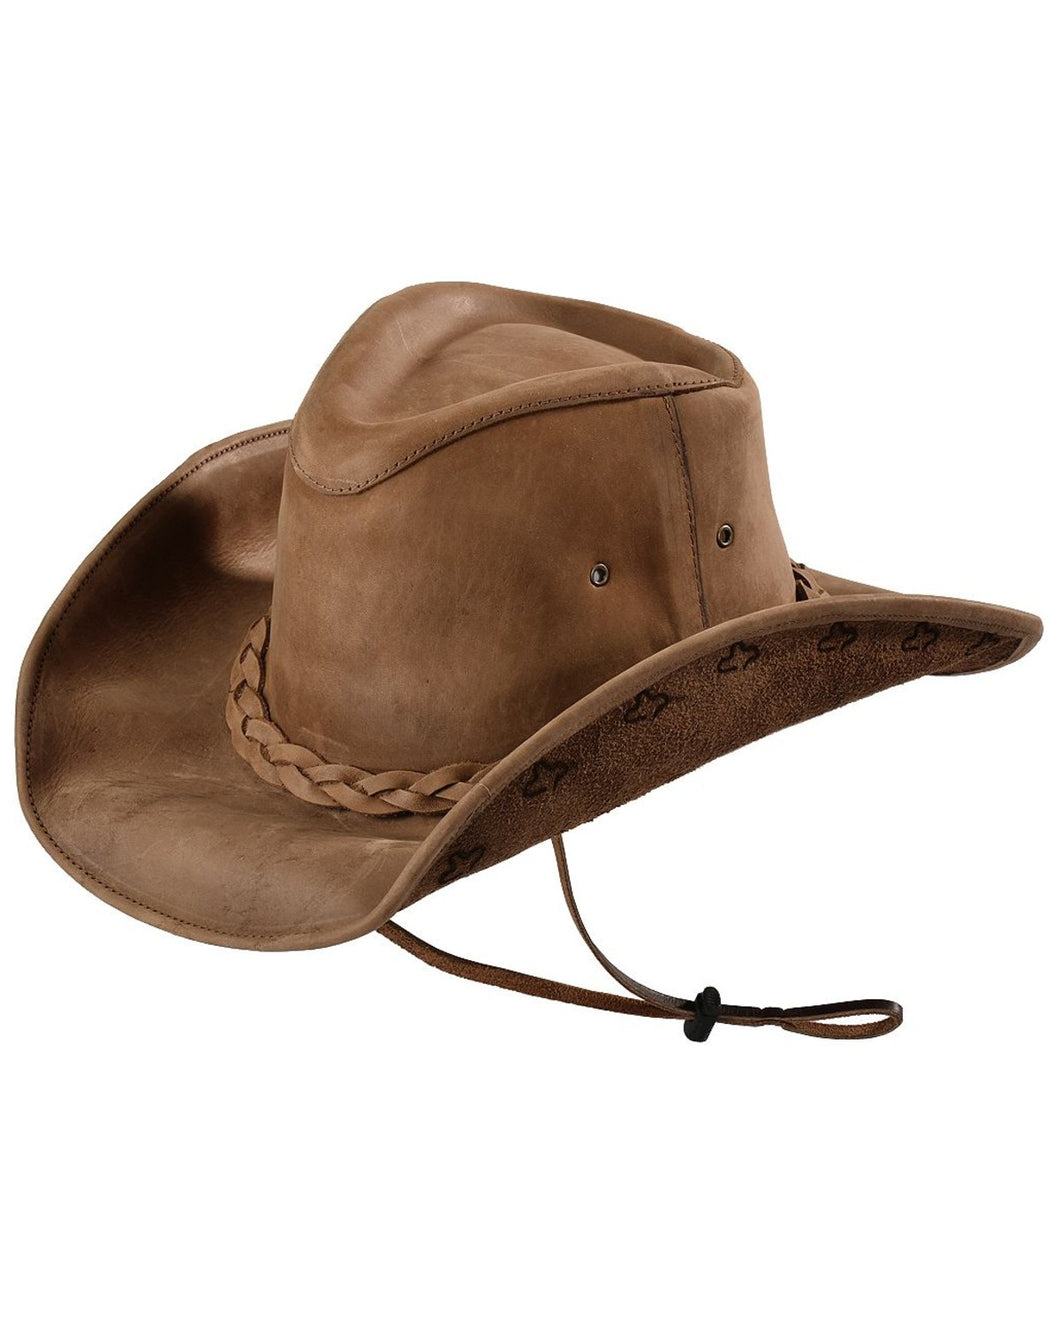 Real brown leather cowboy hat, braided leather around base, has adjustable chin strap